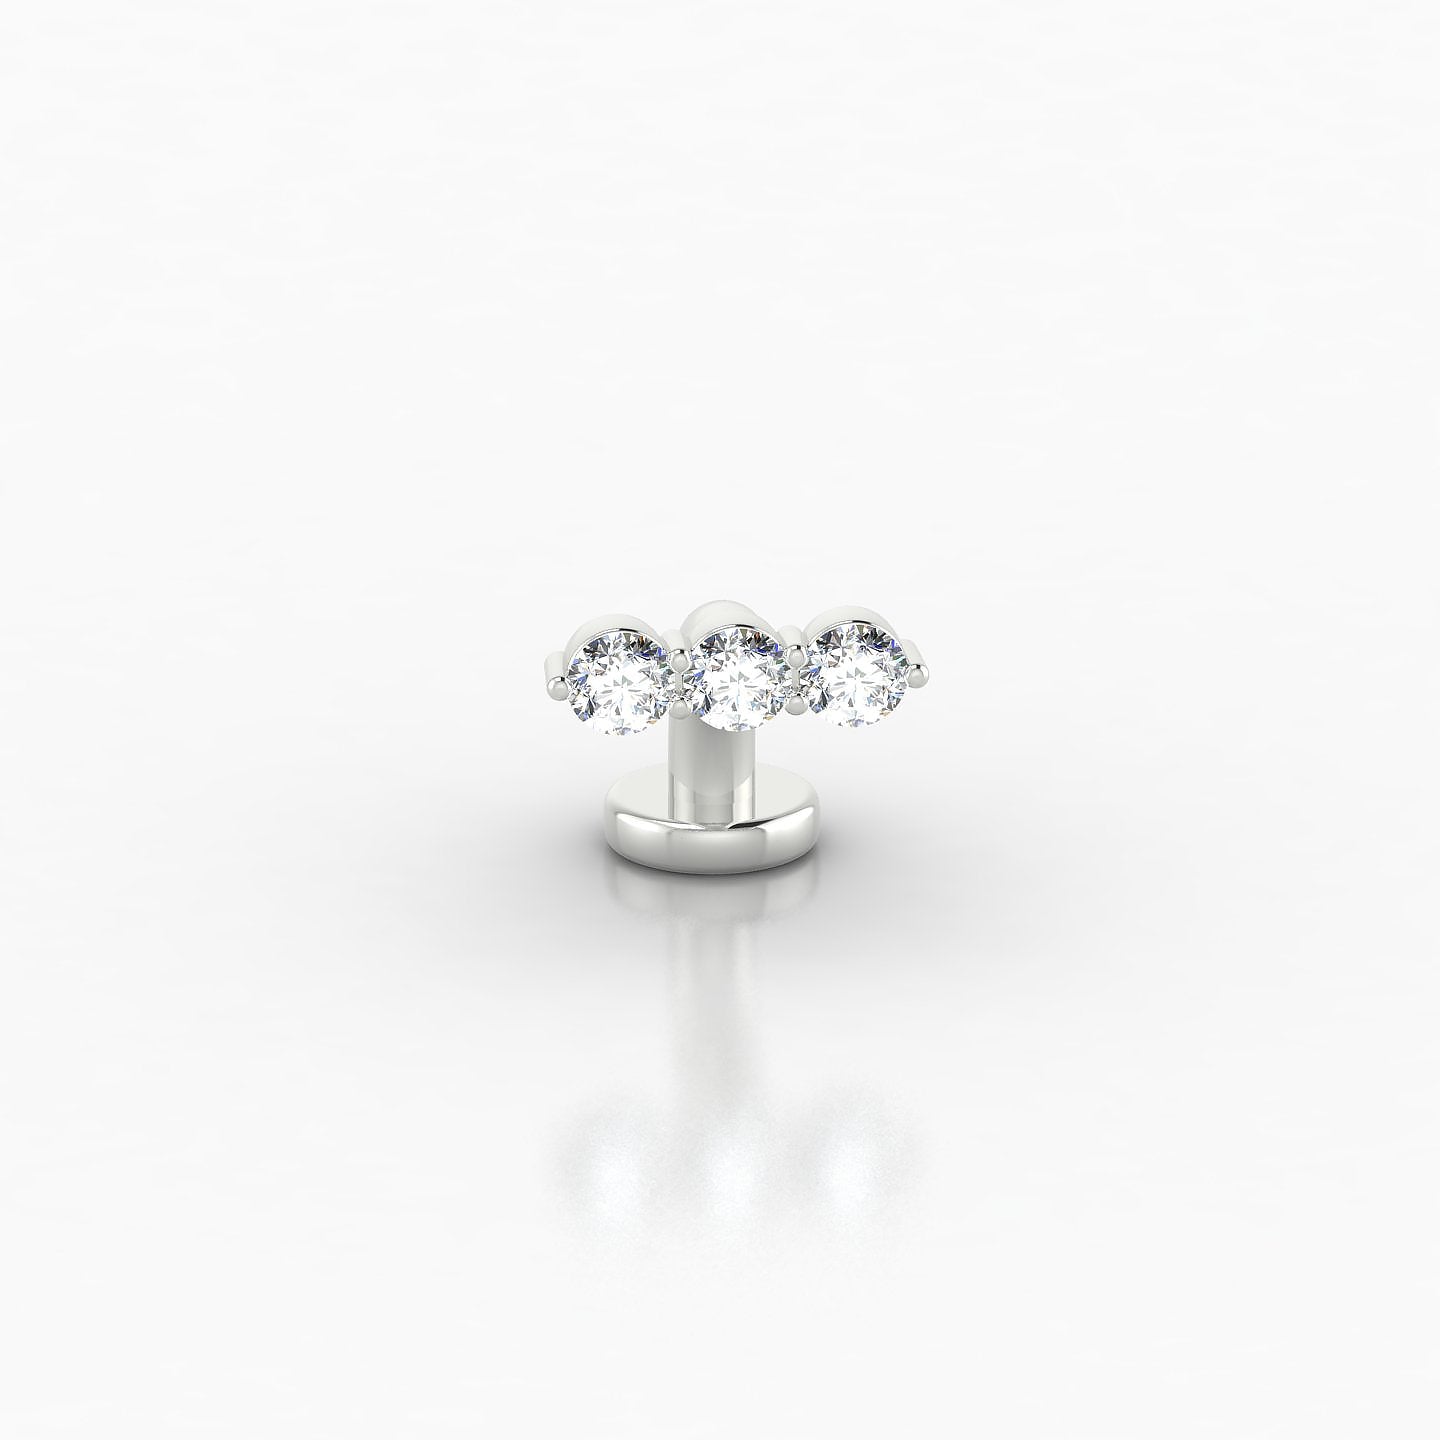 Ma'at | 18k White Gold 6 mm 7.5 mm Trilogy Diamond Floating Navel Piercing